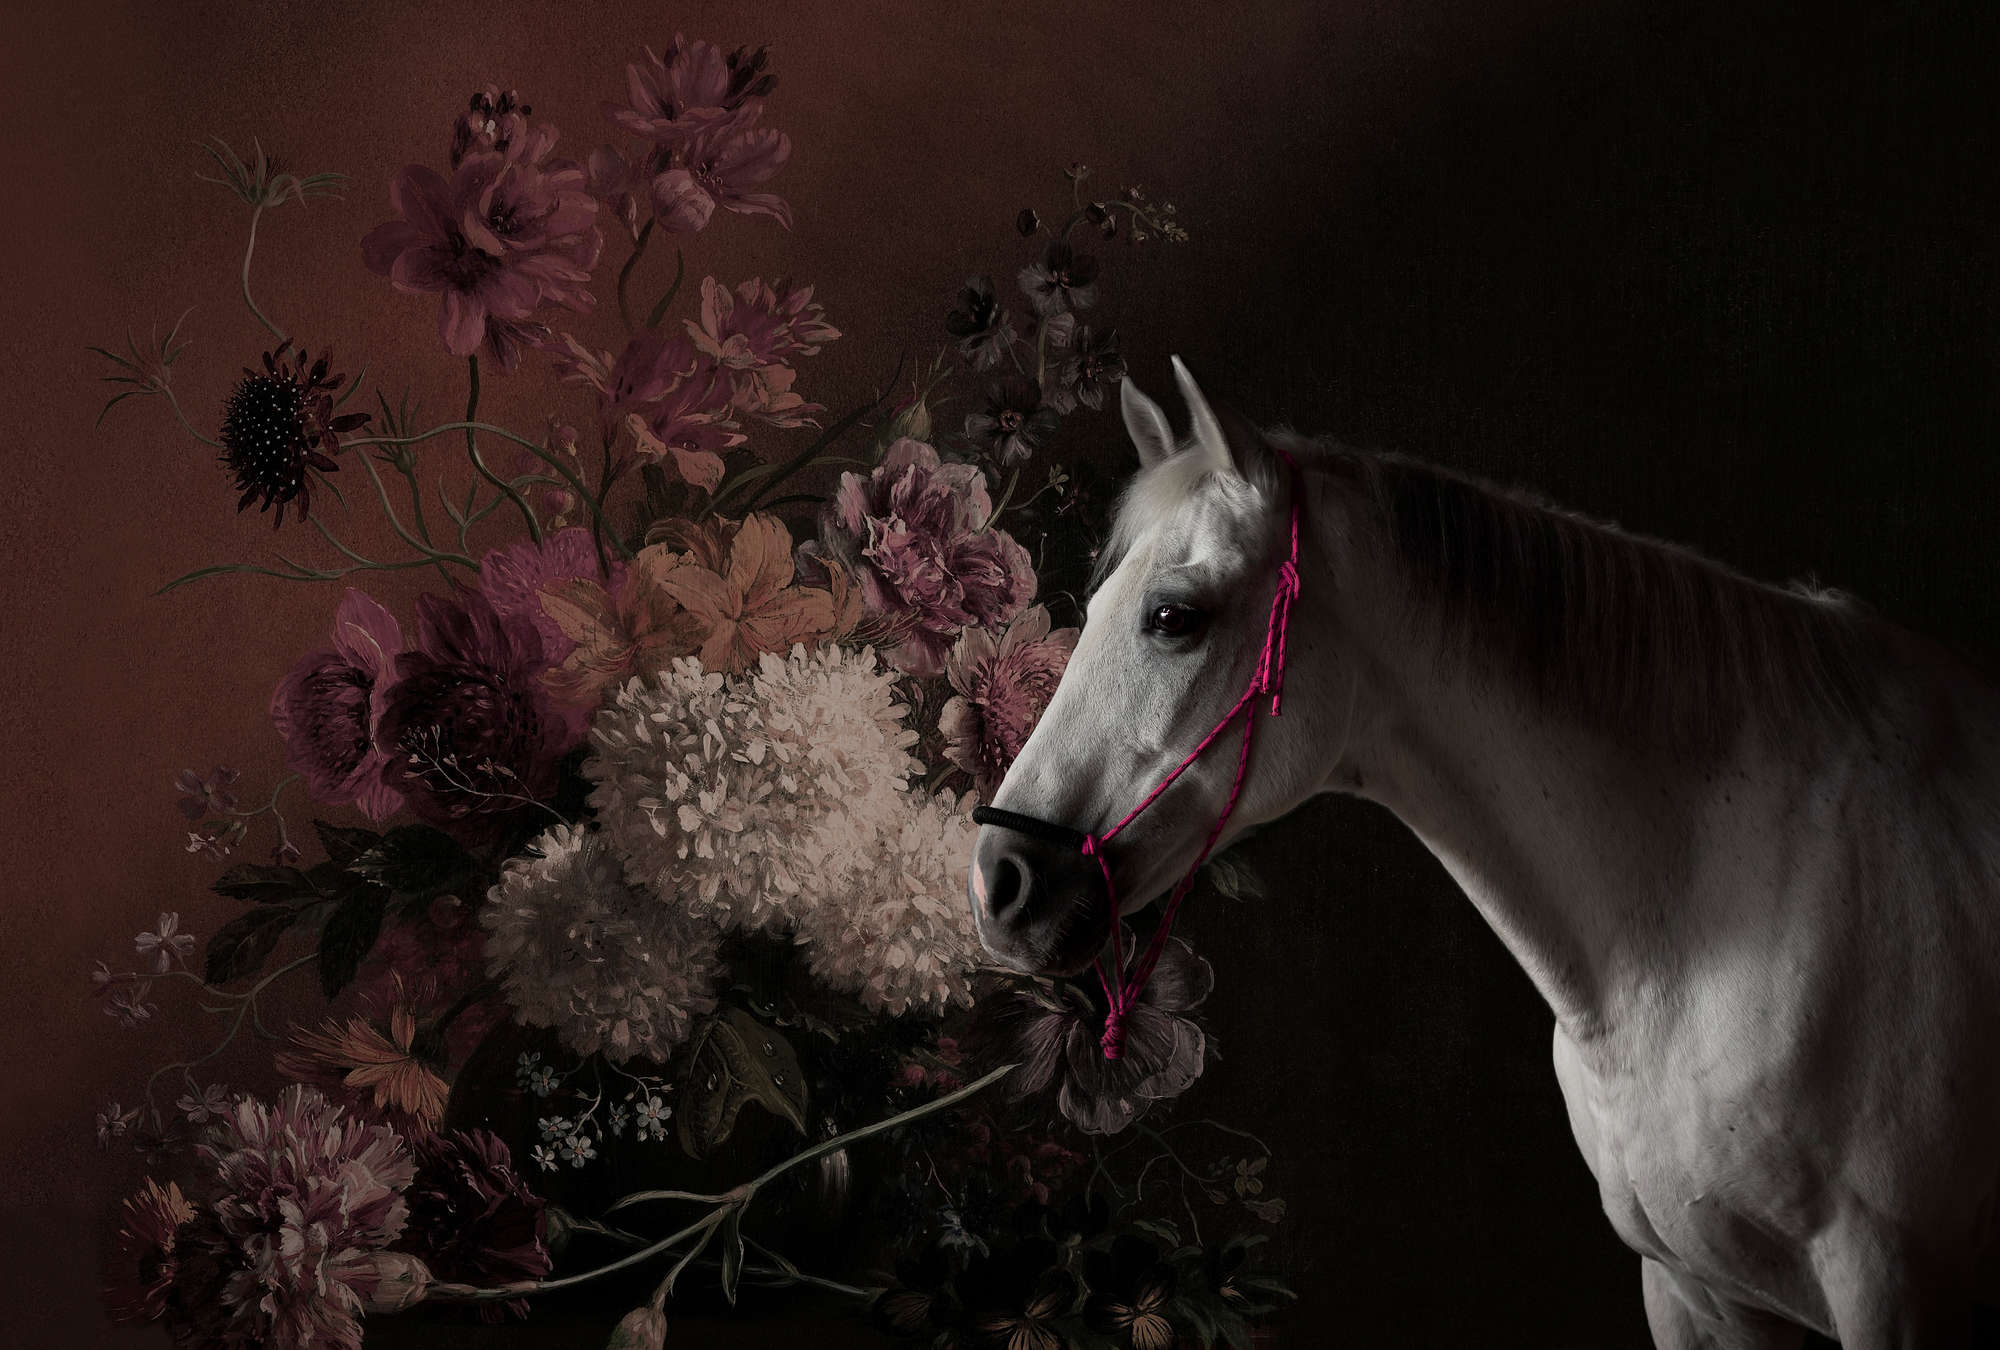             Photo wallpaper Horses Portrait with flowers - Walls by Patel
        